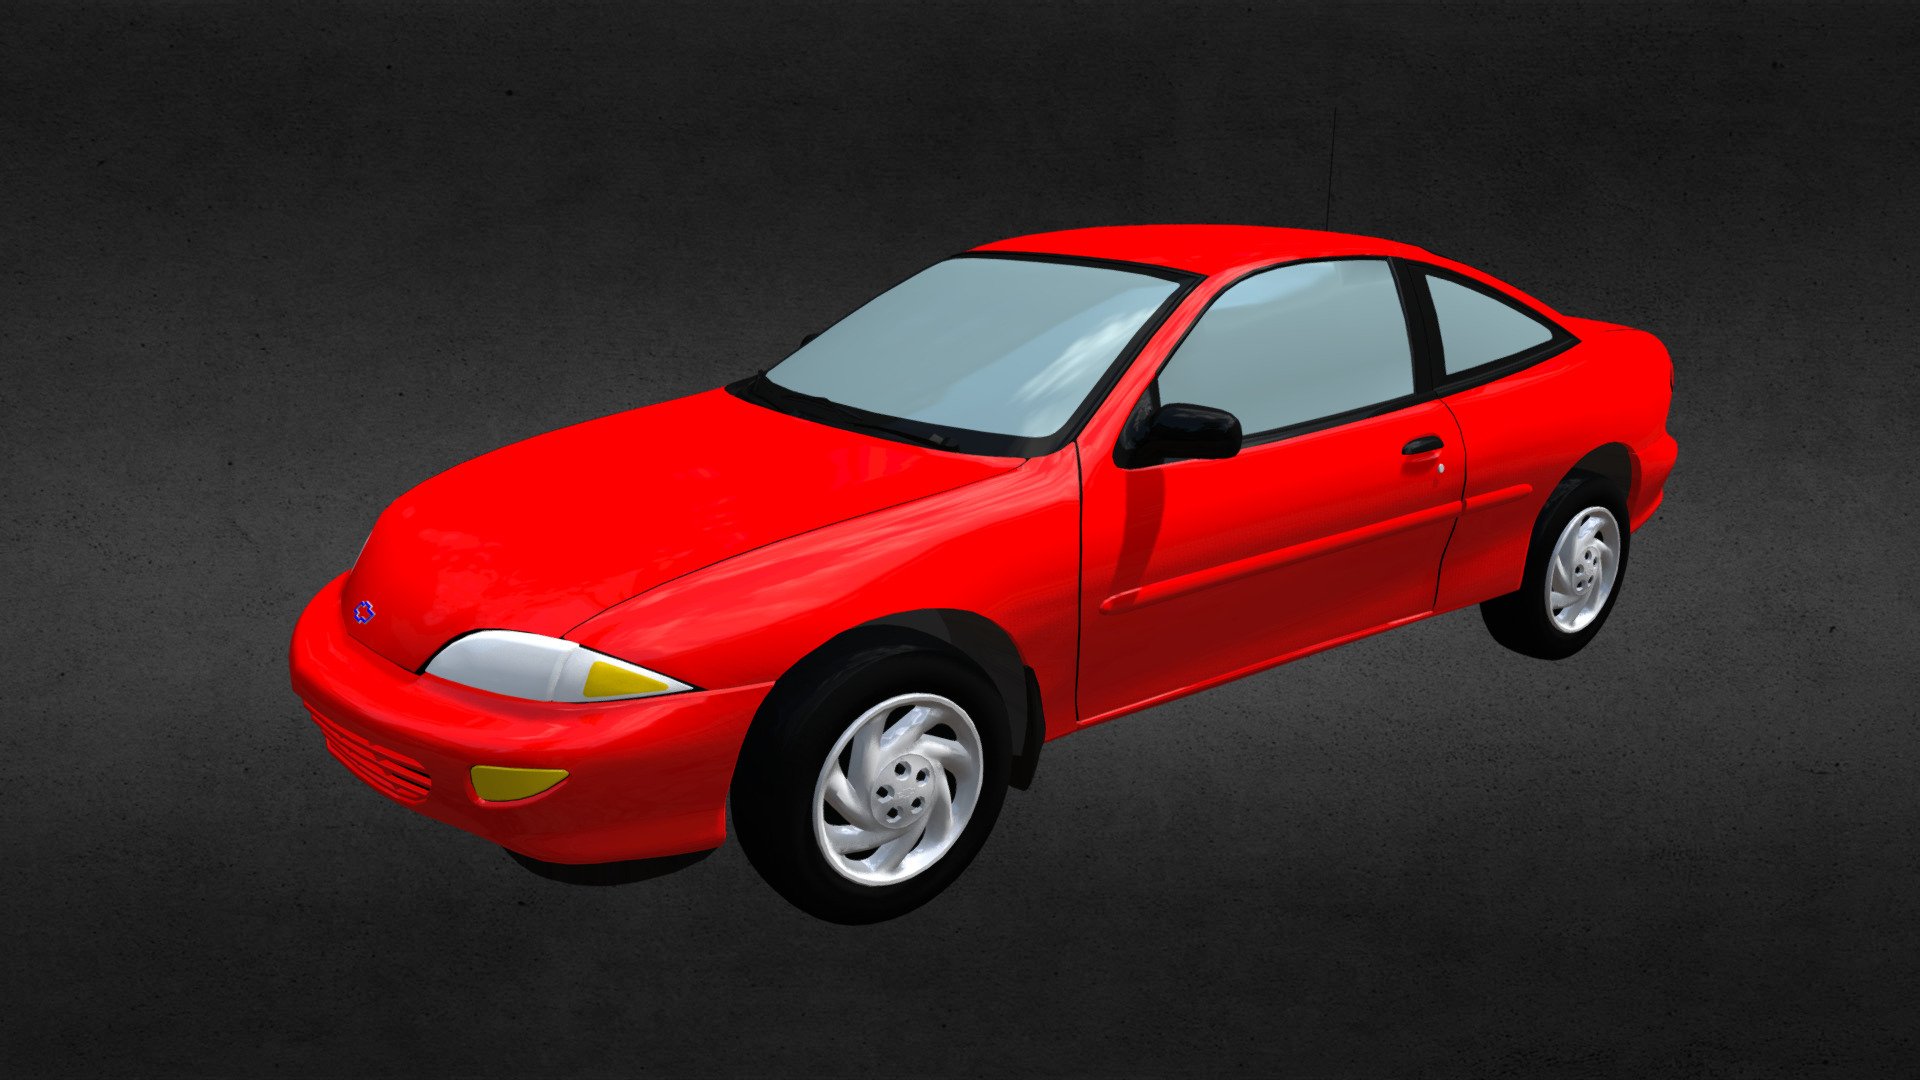 This digital model is based on the 1998 version of the Chevrolet Cavalier.

Product Features:
- Approx 29397 polygons.
- Made entirely with 3 and 4 point polygons.
- Does not have an interior cabin, so we recommend darkening the windows.
- Because of this, the doors are not separate parts.
- Includes group information for all 4 wheels which your software should interpret as separate parts. The doors are not separate parts.
- Although the model includes these parts, this version of the model is not rigged.
- Includes logically named materials.
- This version includes an mtl file
- The model has basic UV mapping and NO textures are included. You'll need to apply your own shaders, such as metal and fabric.

Model by Digimation and uploaded for sale here with permission 3d model